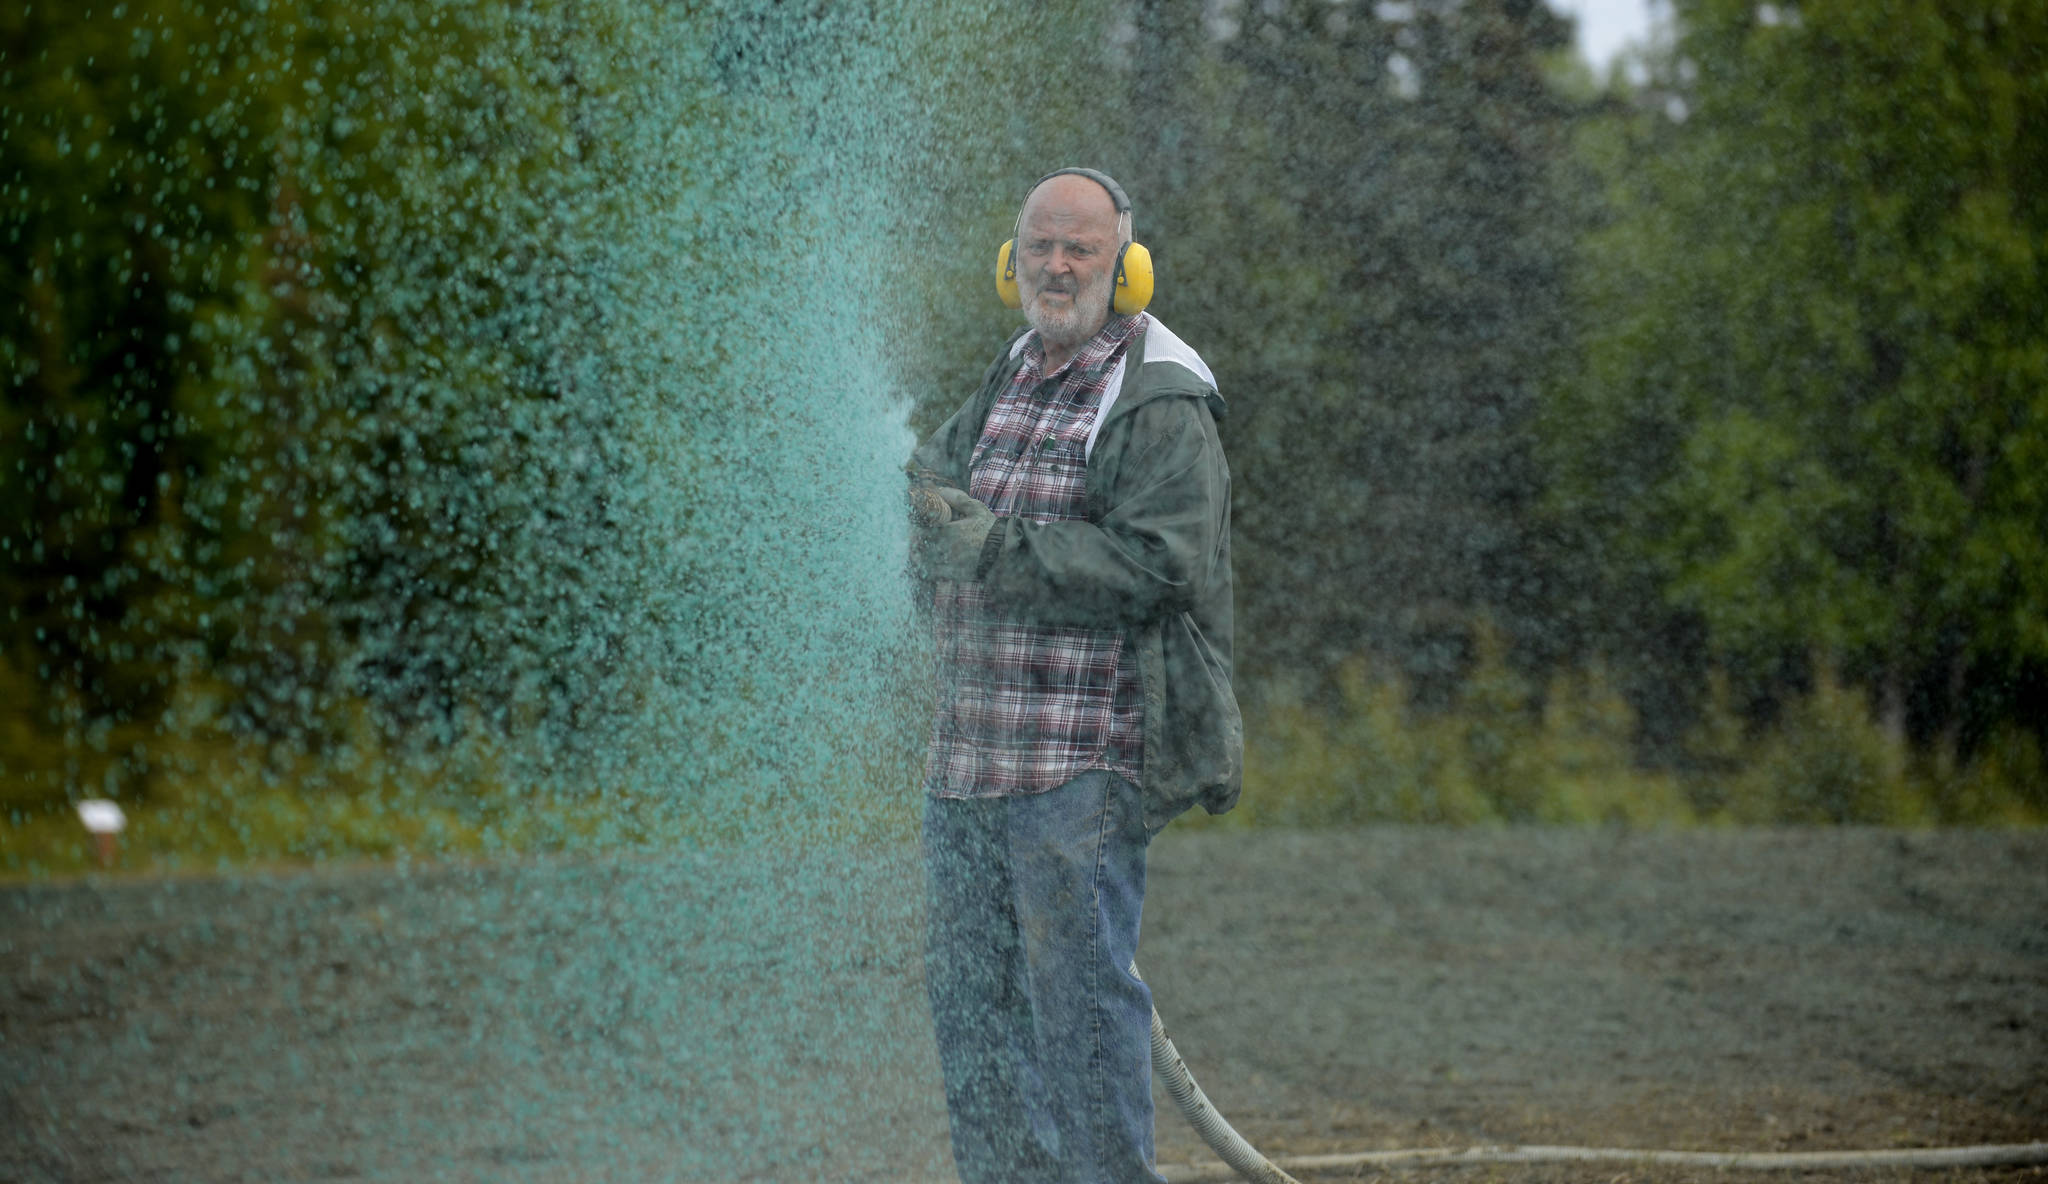 Charles Woodcock of Woodcock’s Hydroseeding sprays a mix of water, fertilizer, paper pulp, and wildflower seeds across the soon-to-be Kenai Field of Flowers on Monday, June 5. Since 2014, Kenai’s municipal government has been turning the vacant city-owned lot into a summer attraction by seeding it with 15 varieties of wildflower, which Kenai Parks and Recreation Director Bob Frates said include lupin, poppies, cosmos, columbine, cornflower, baby’s breath, flax, and forget-me-not. After a drizzling Monday morning, Woodcock started spraying the field at noon — the ground’s dampness, he said, makes it better for seeding. In past years, the flowers have usually started to sprout in mid-July. Frates said that hydroseeding the approximately 55,000 square feet of the field costs about $5,400.